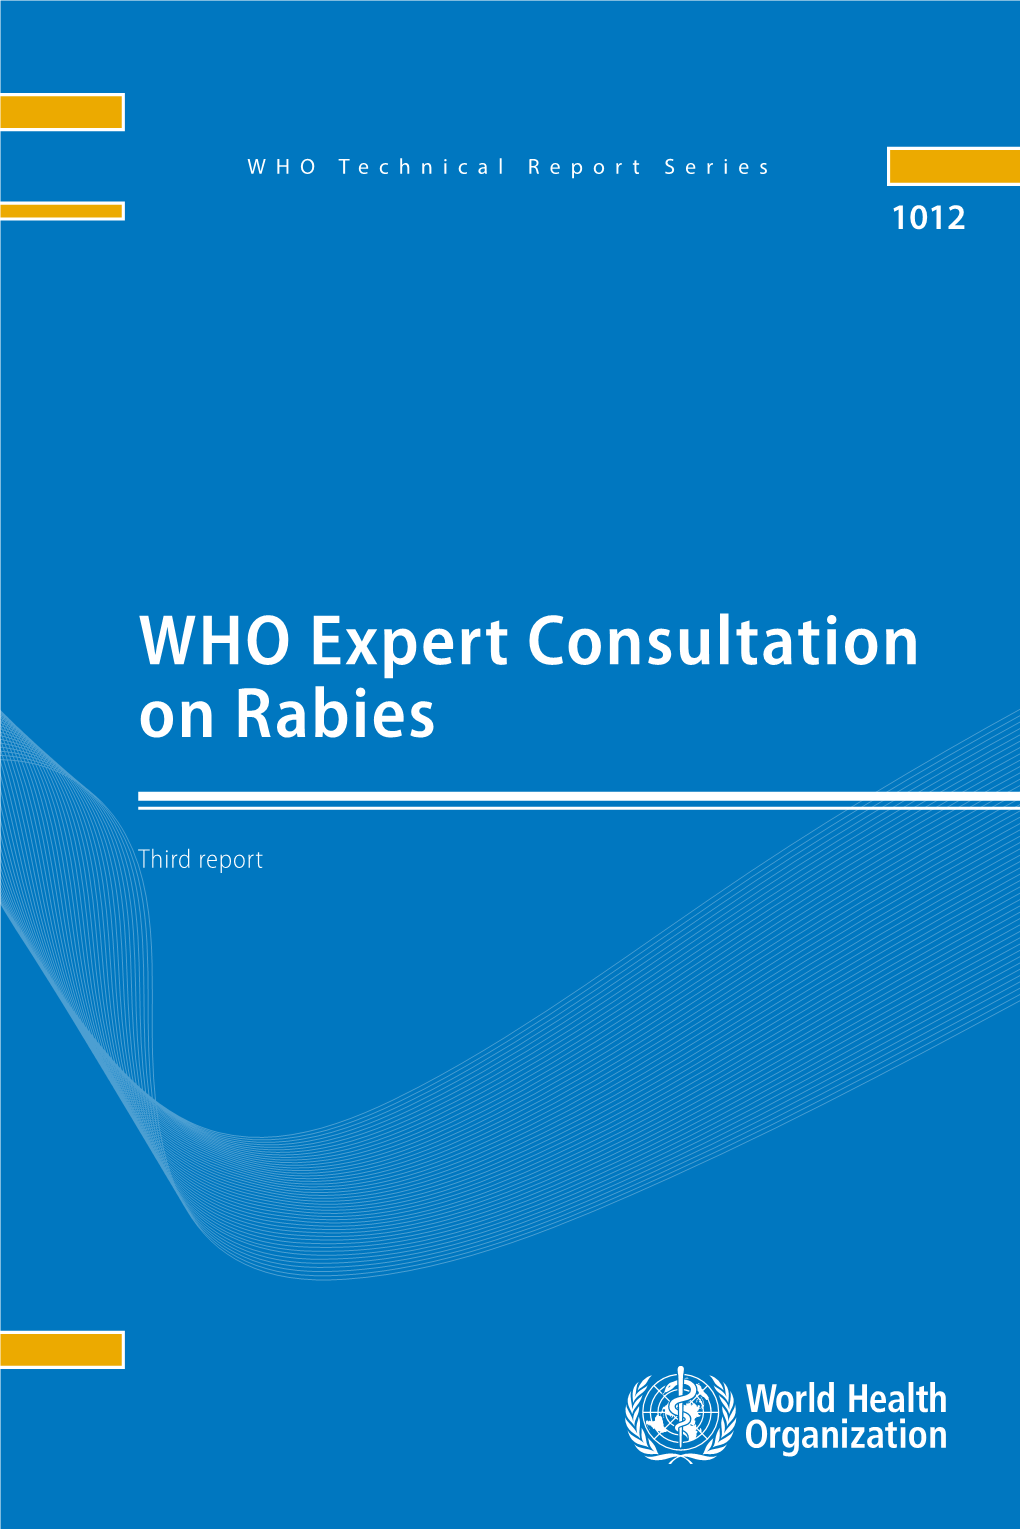 WHO Expert Consultation on Rabies WHO Technical Report Series N